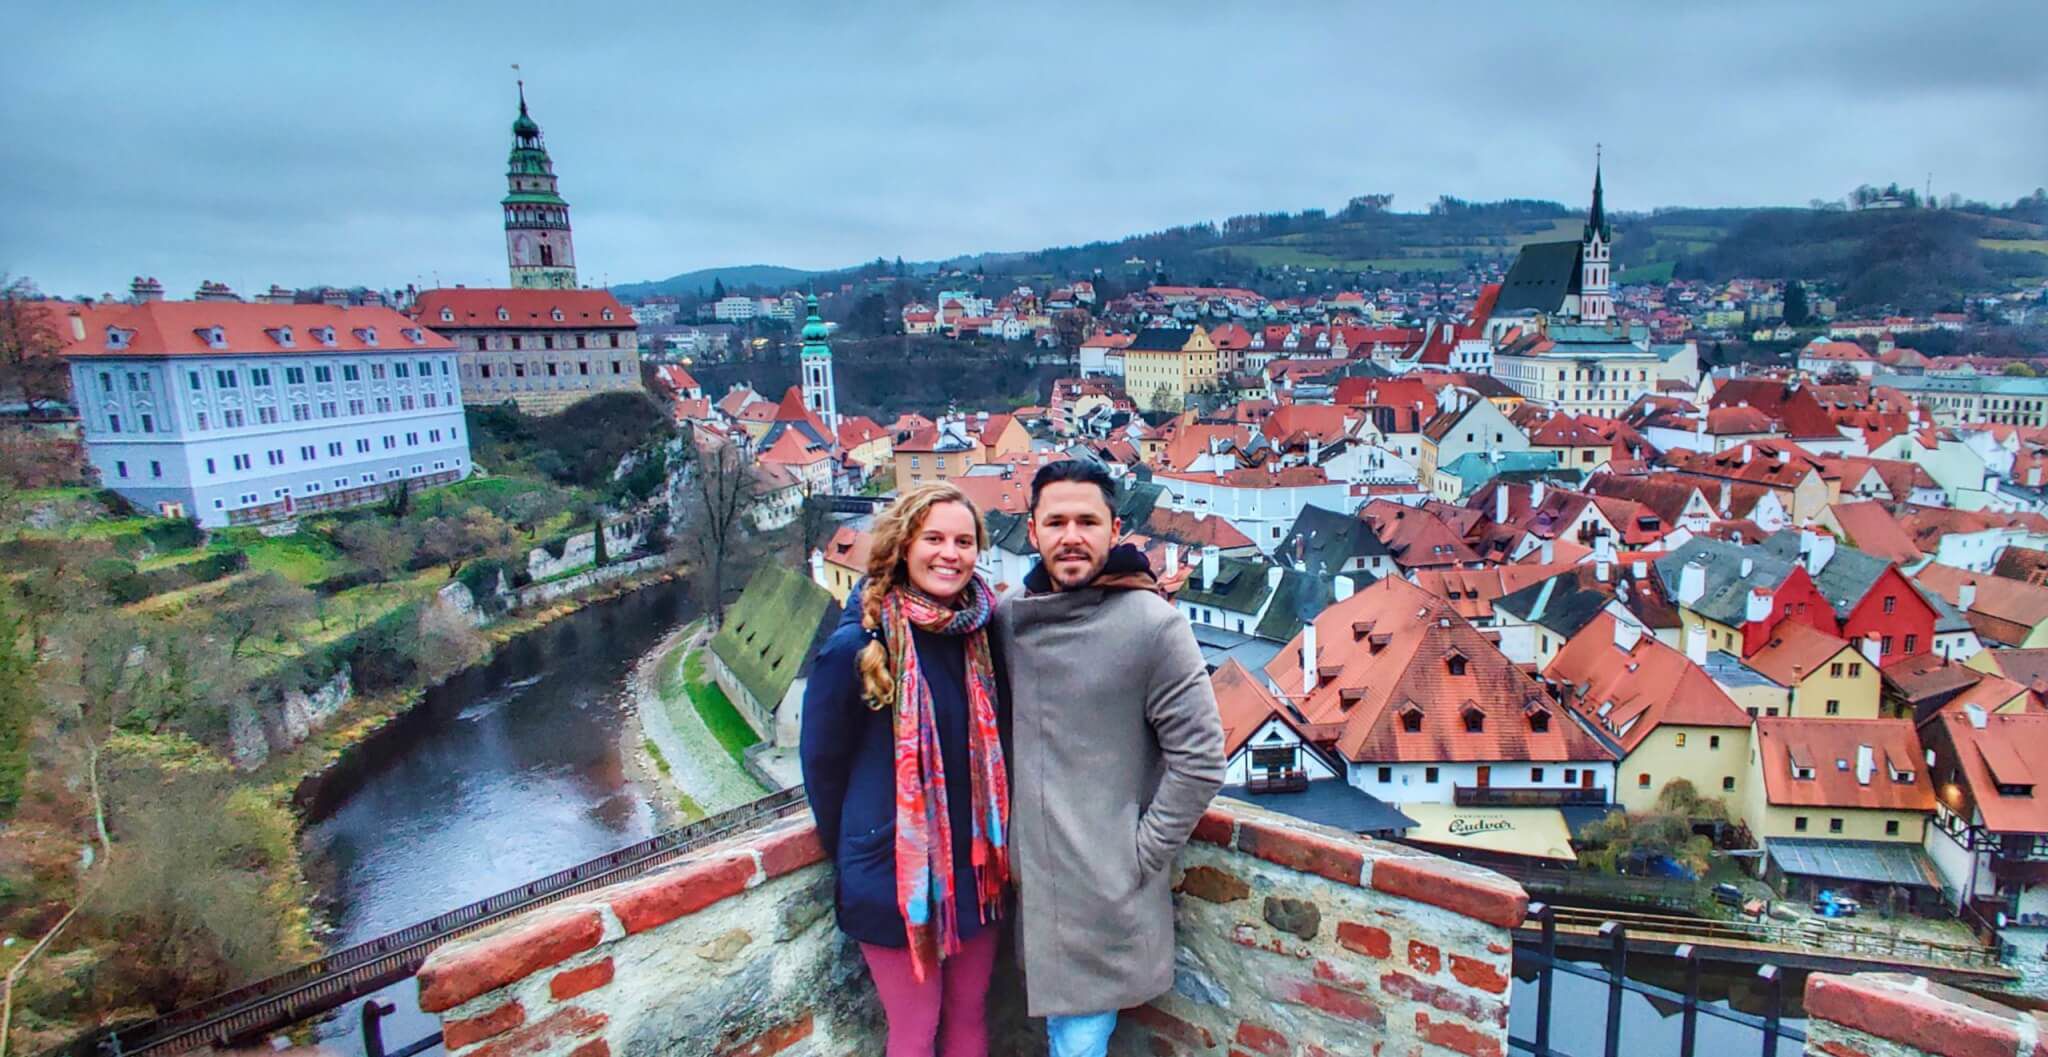 Cesky Krumlov: One of the prettiest cities I’ve seen in Europe in a while!